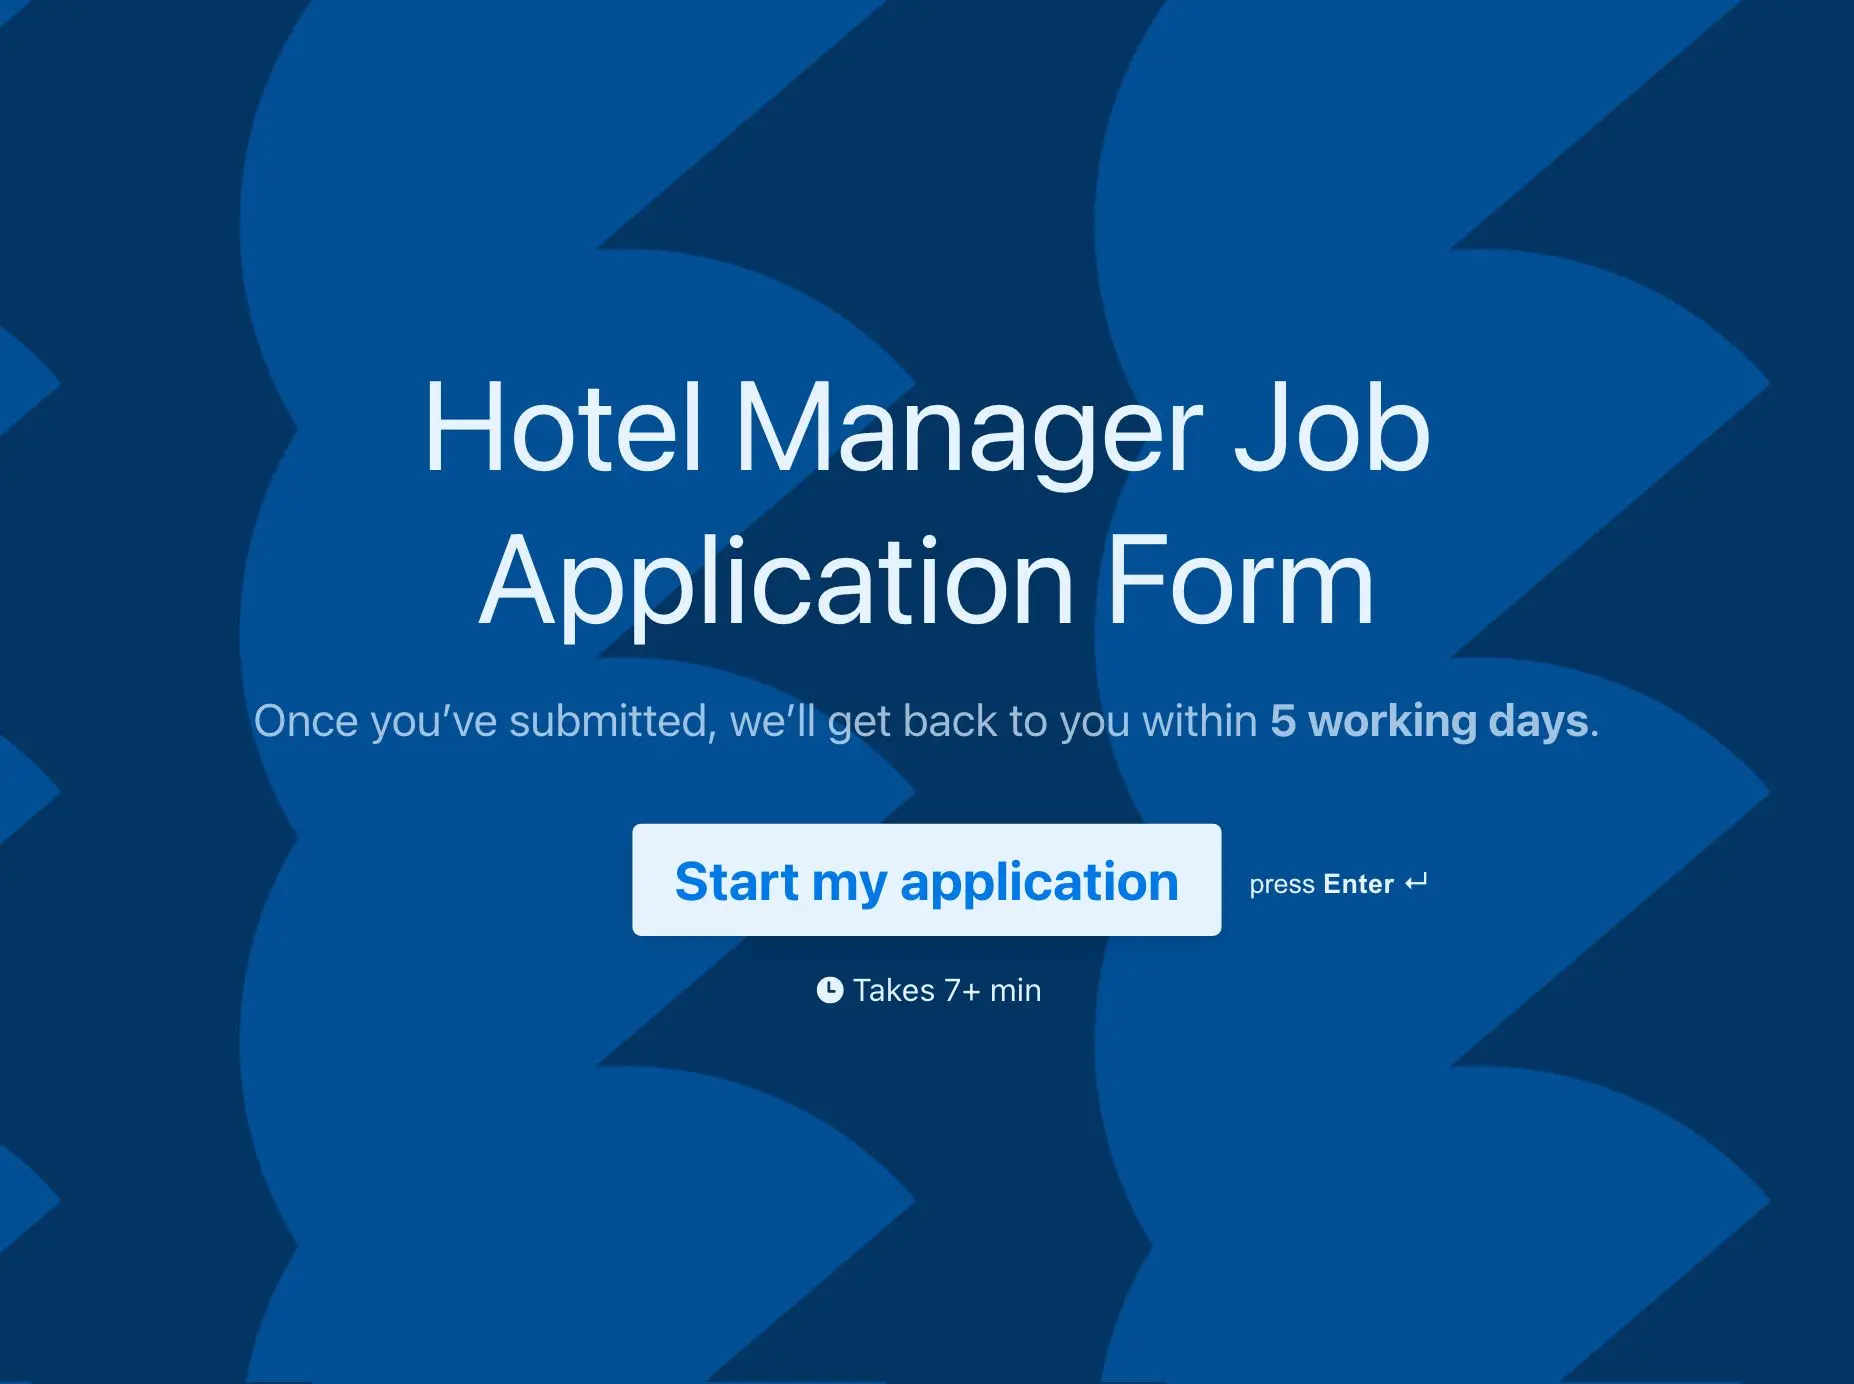 Hotel Manager Job Application Form Template Hero